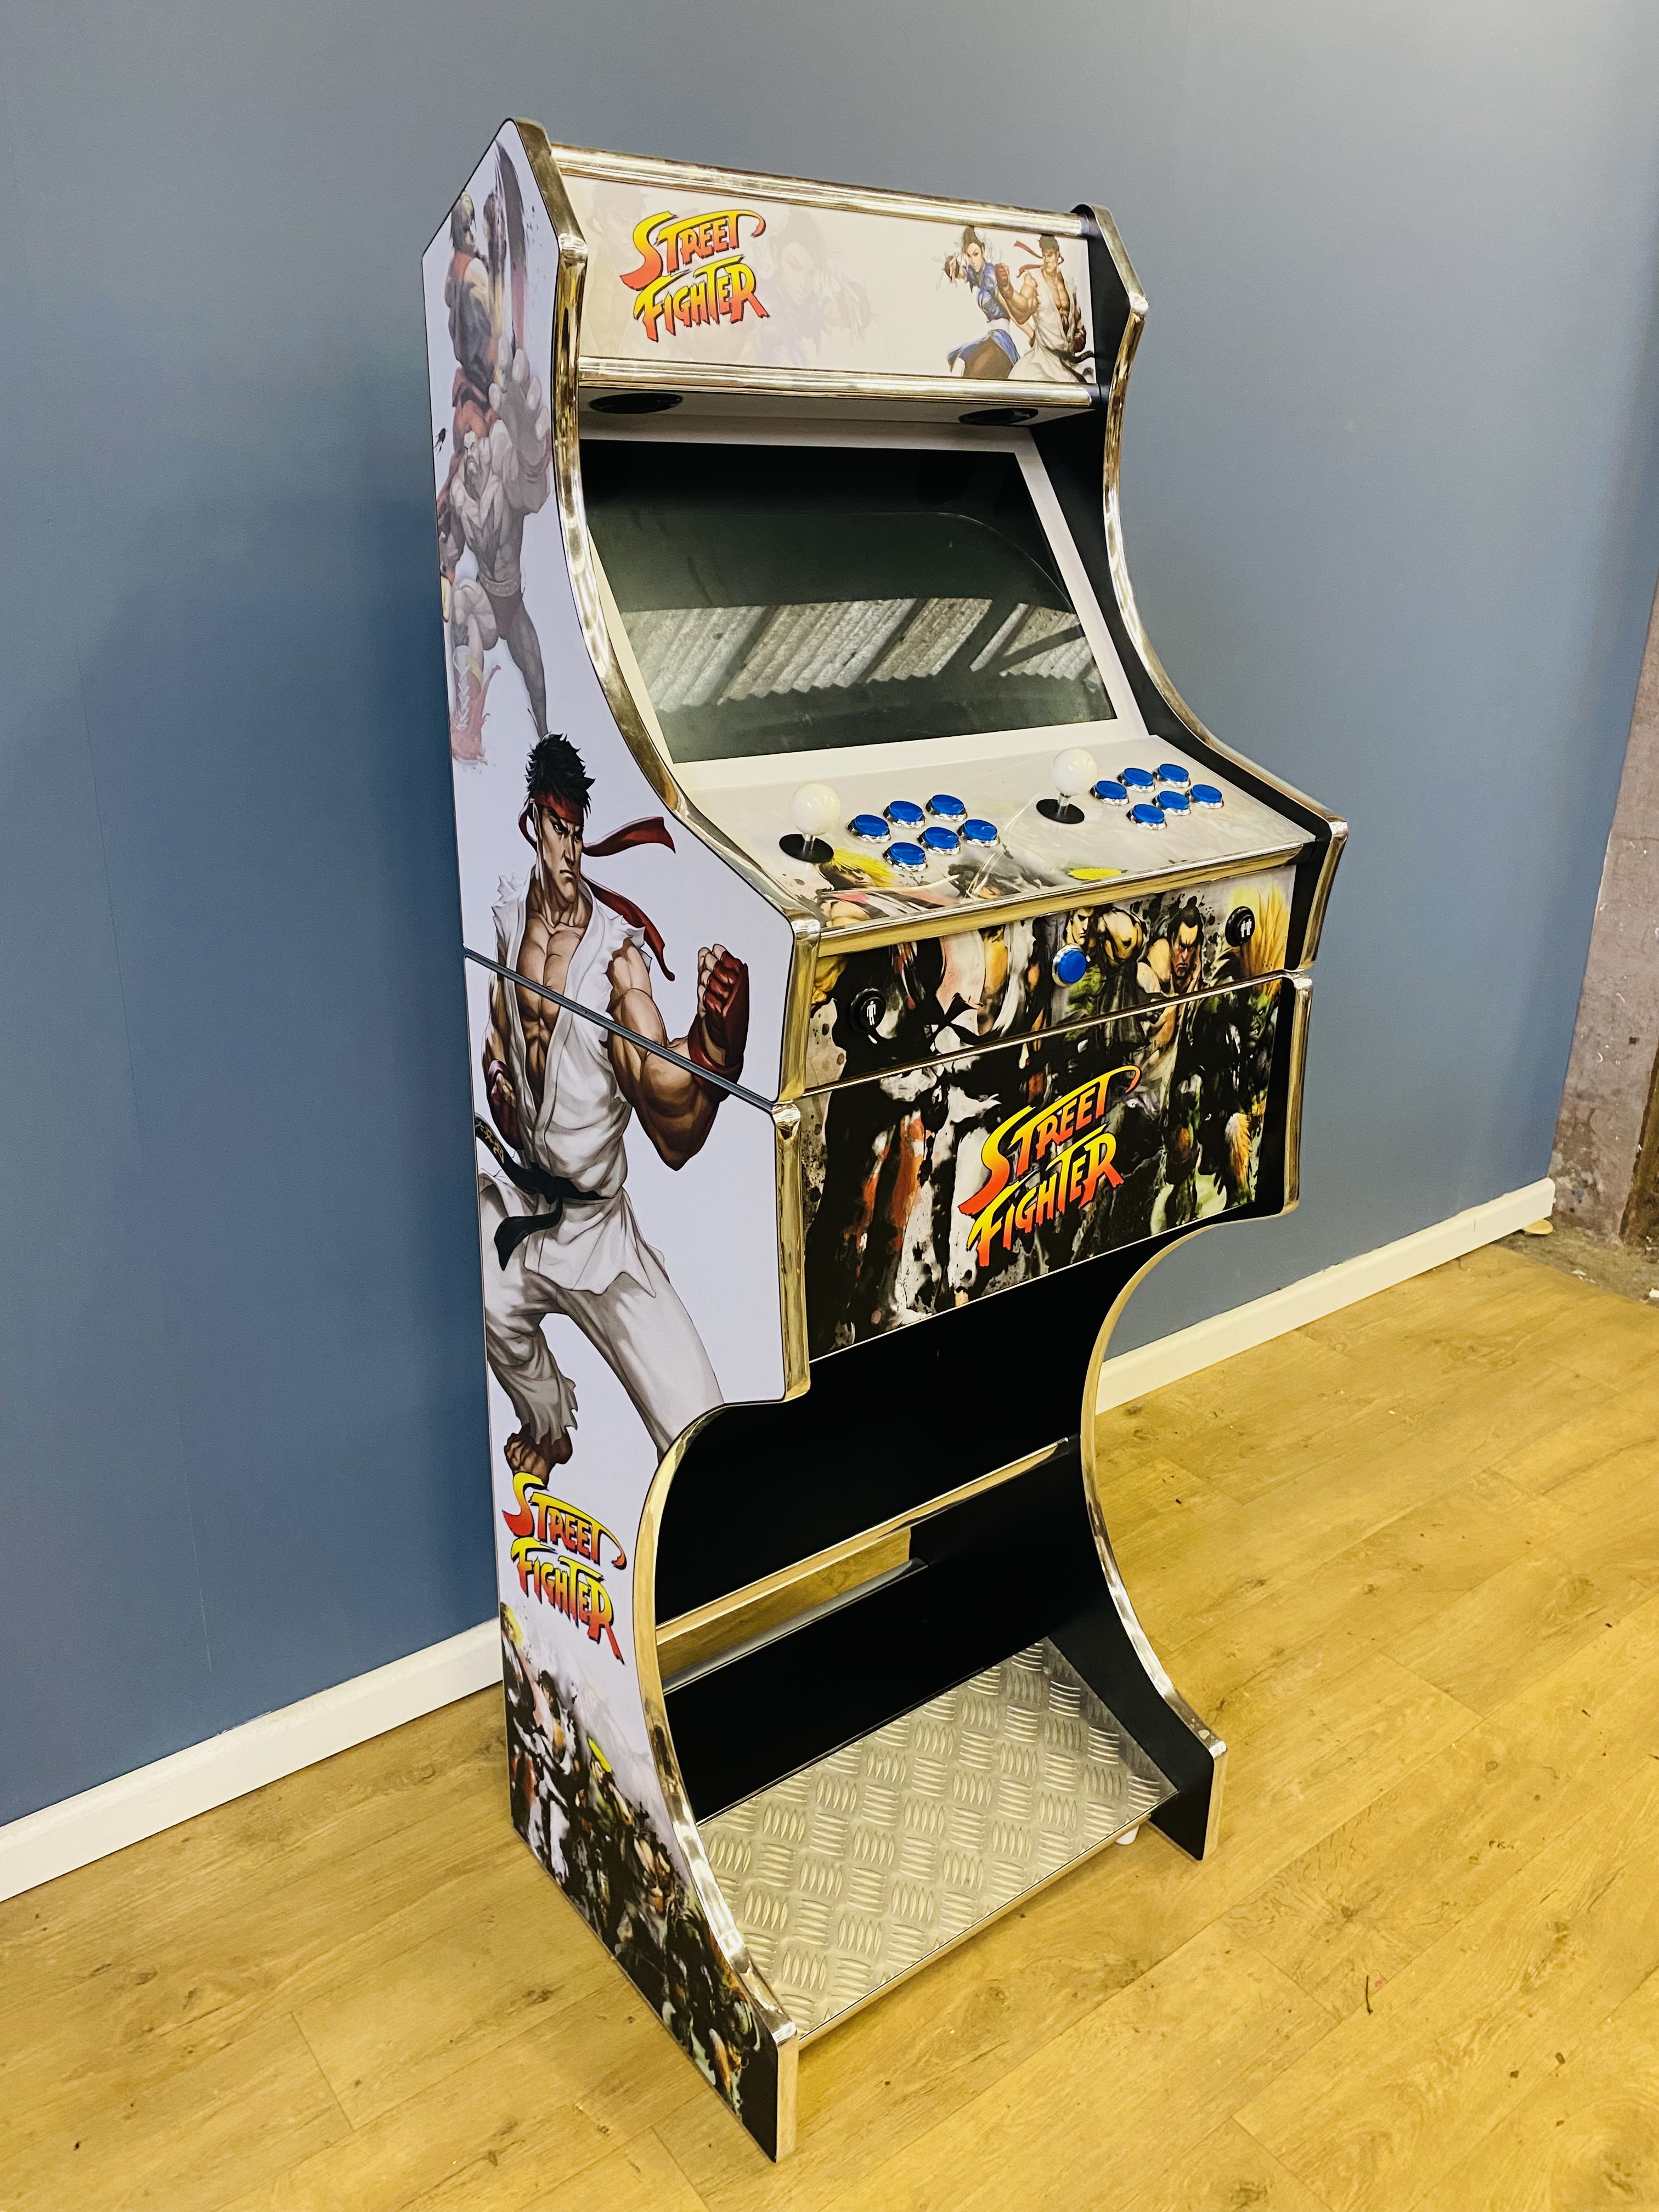 Arcade Mania Street Fighter, arcade style game with pre-loaded games - Image 2 of 3